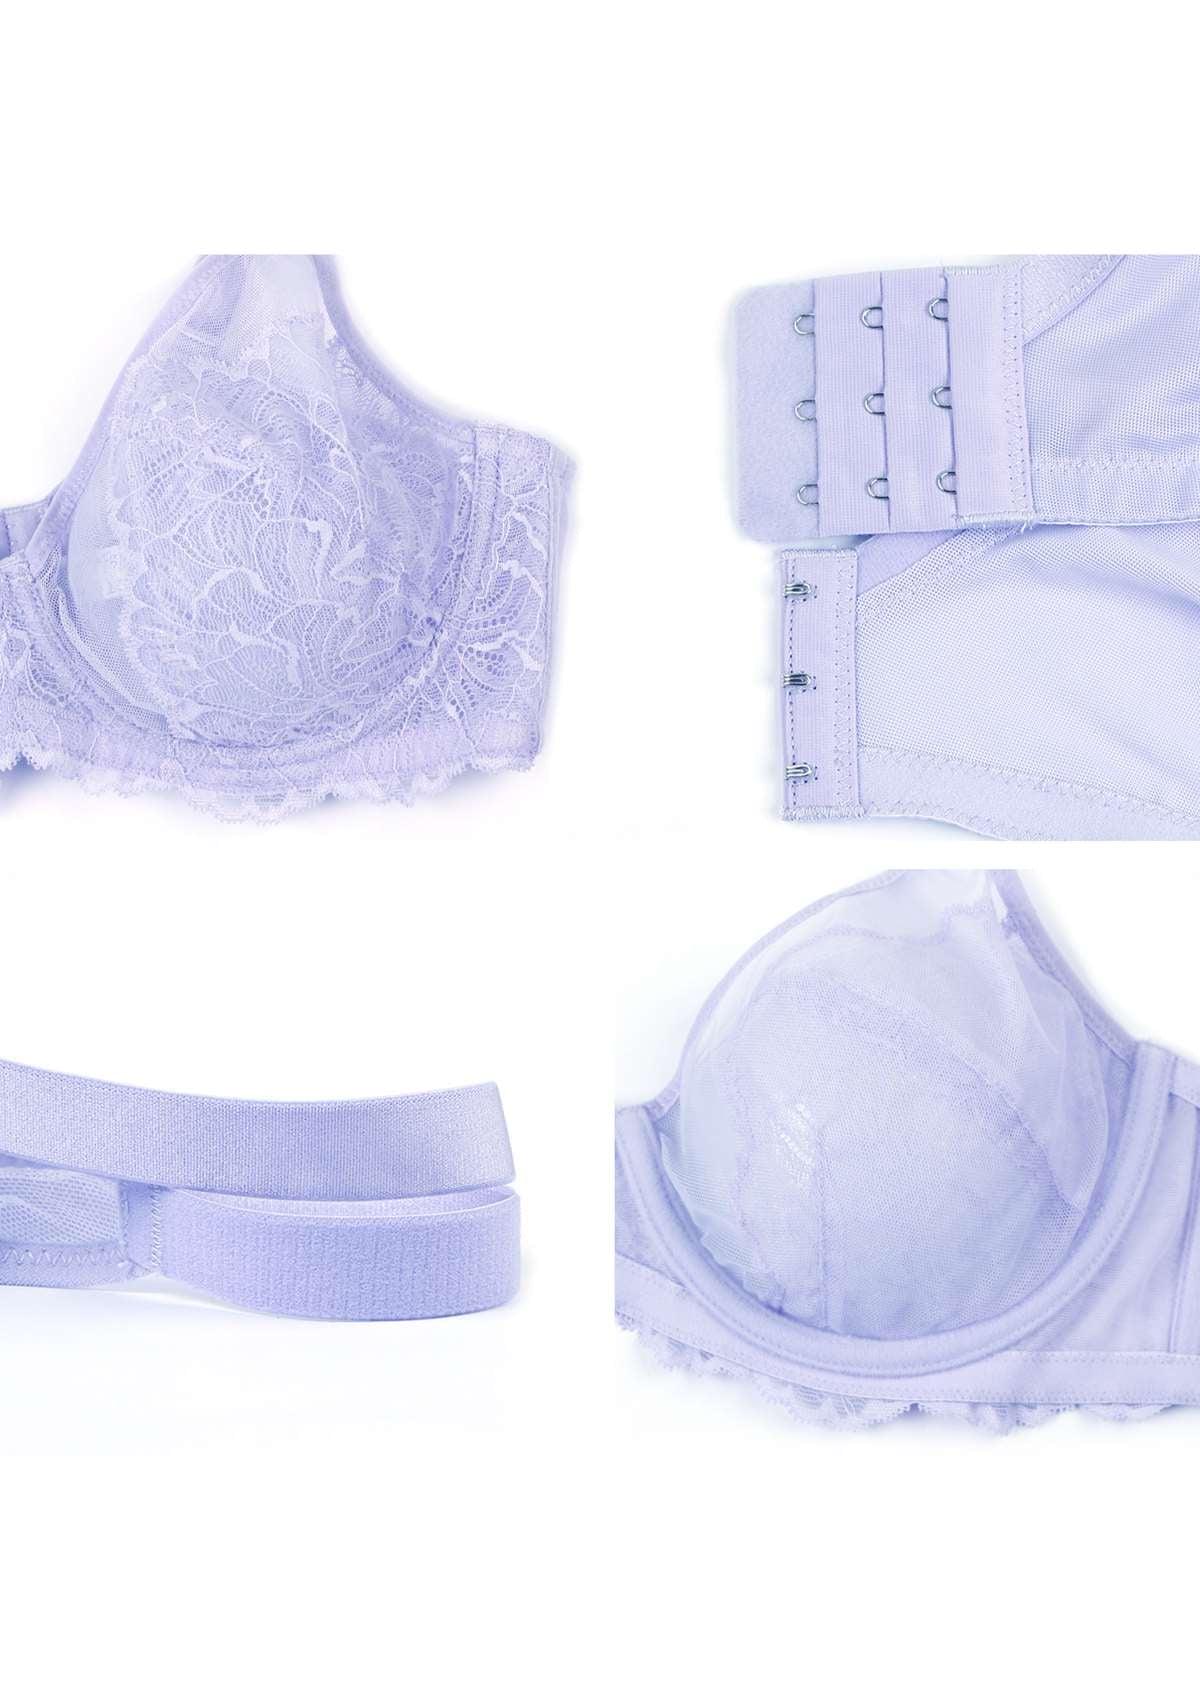 HSIA Blossom Transparent Lace Bra: Plus Size Wired Back Smoothing Bra - Light Purple / 36 / DD/E